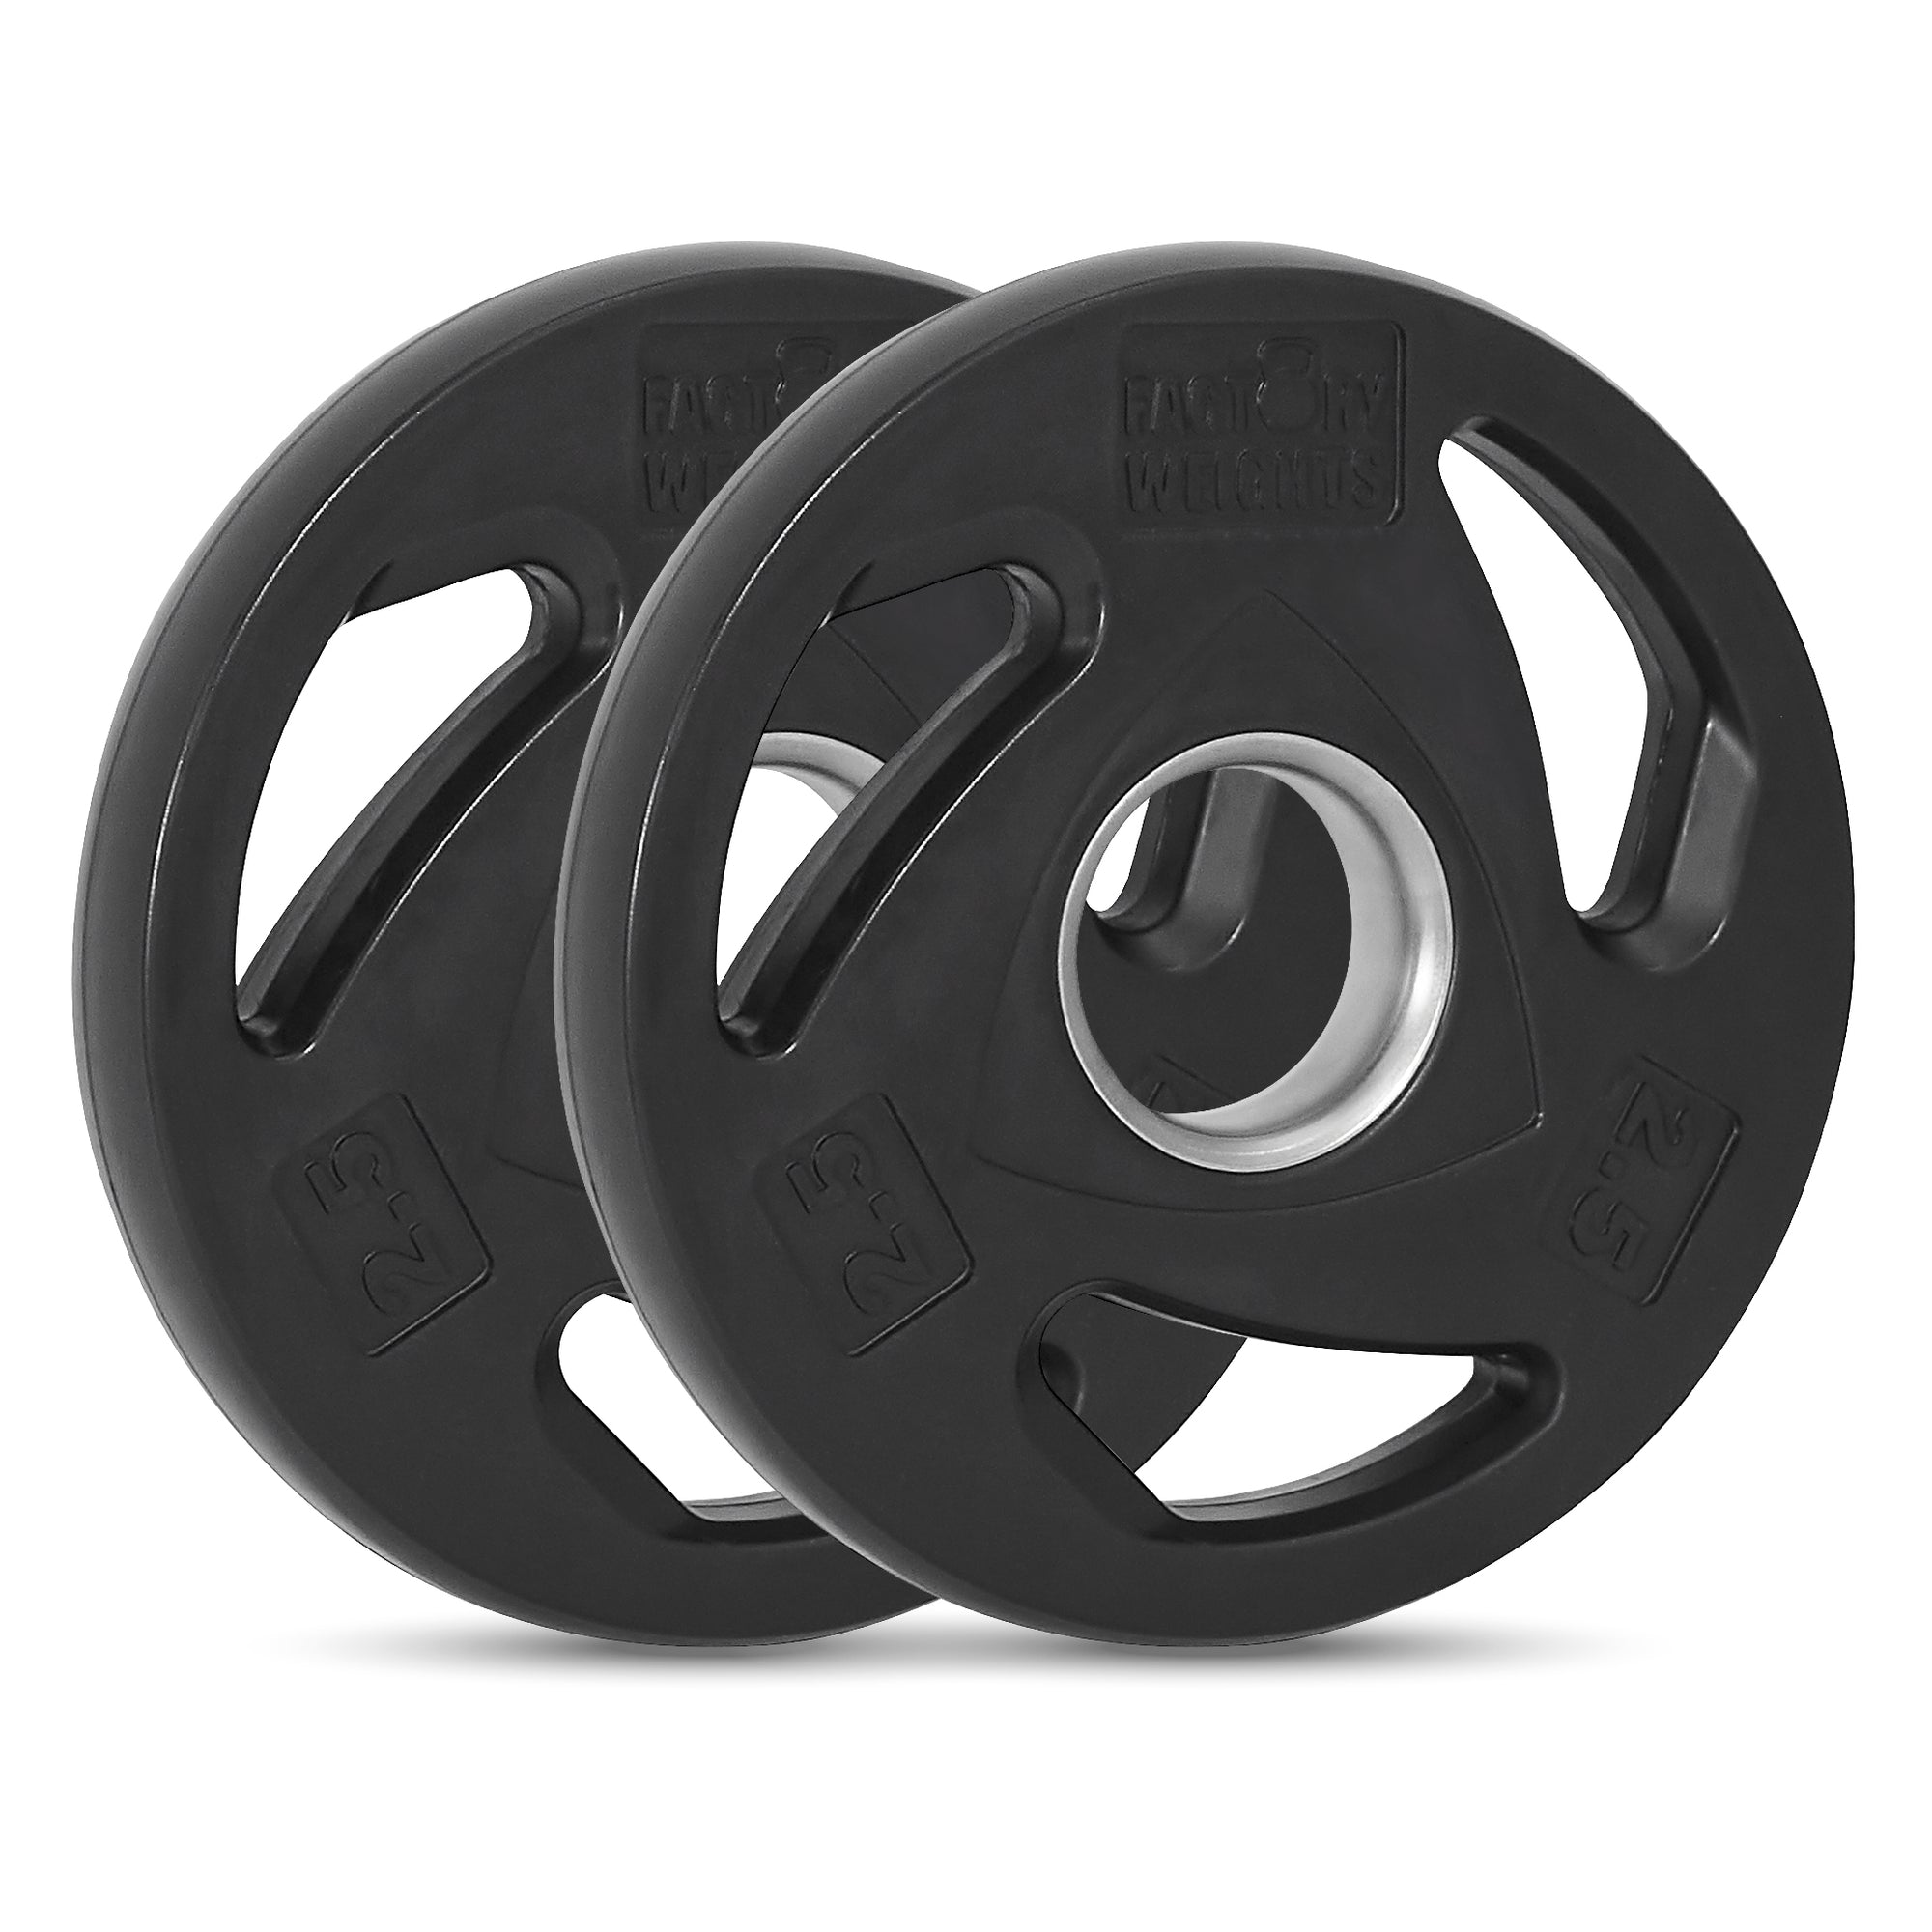 2.5kg Rubber Weight Plates